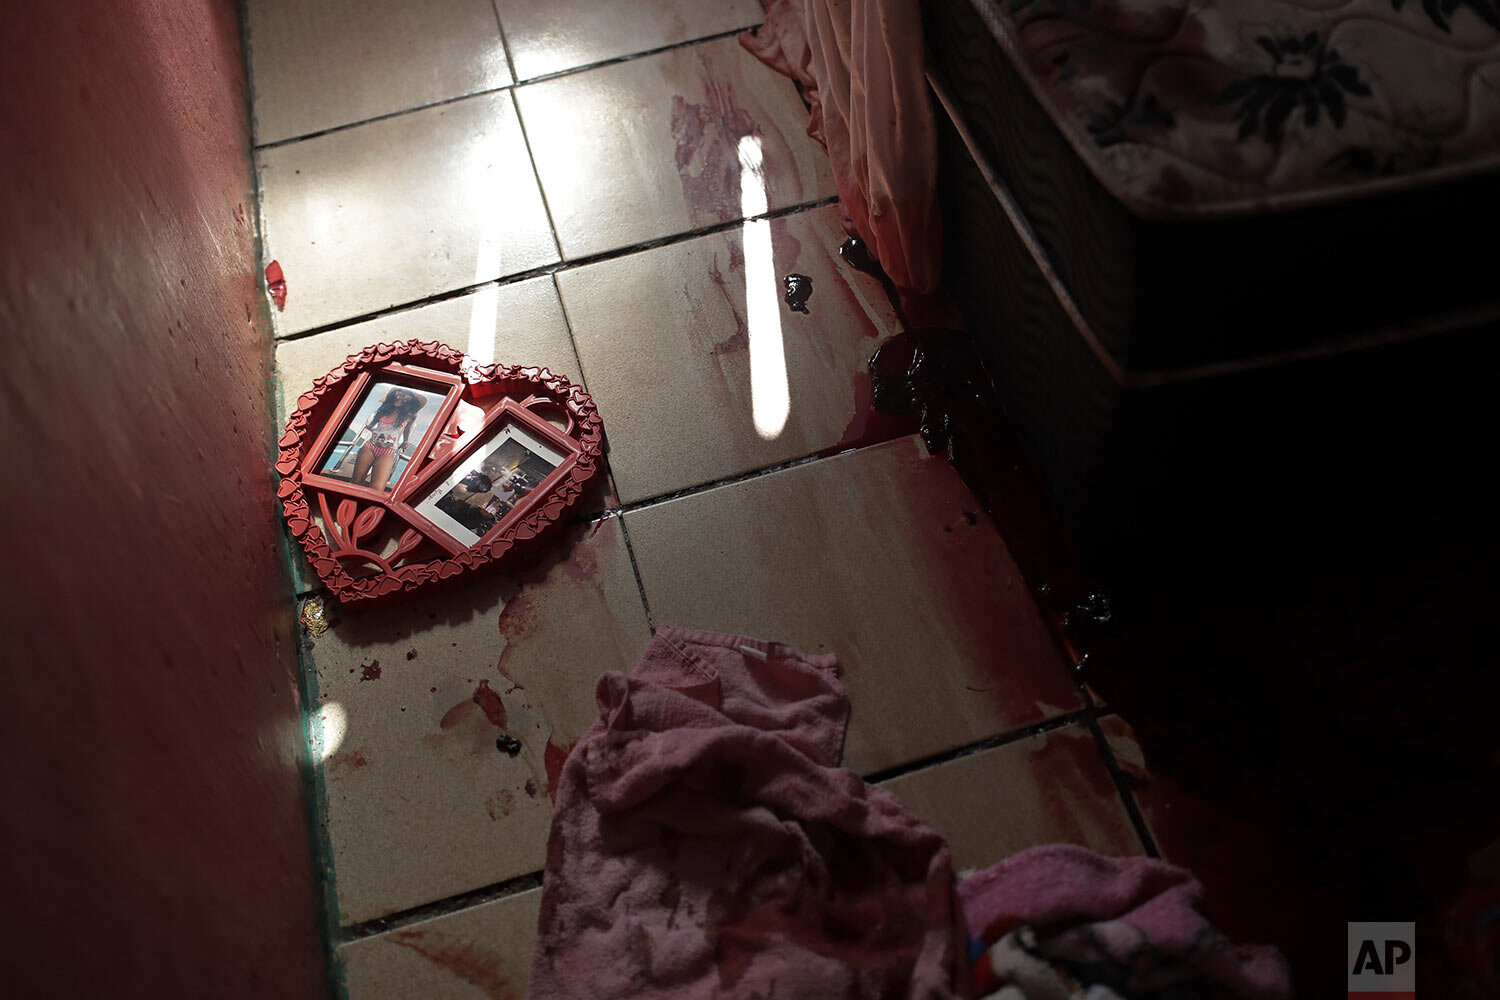  A heart shaped picture frame lays on a blood covered floor inside a home in the aftermath of a police raid targeting drug traffickers that killed at least 25 people in the Jacarezinho favela of Rio de Janeiro, Brazil, May 6, 2021. (AP Photo/Silvia I